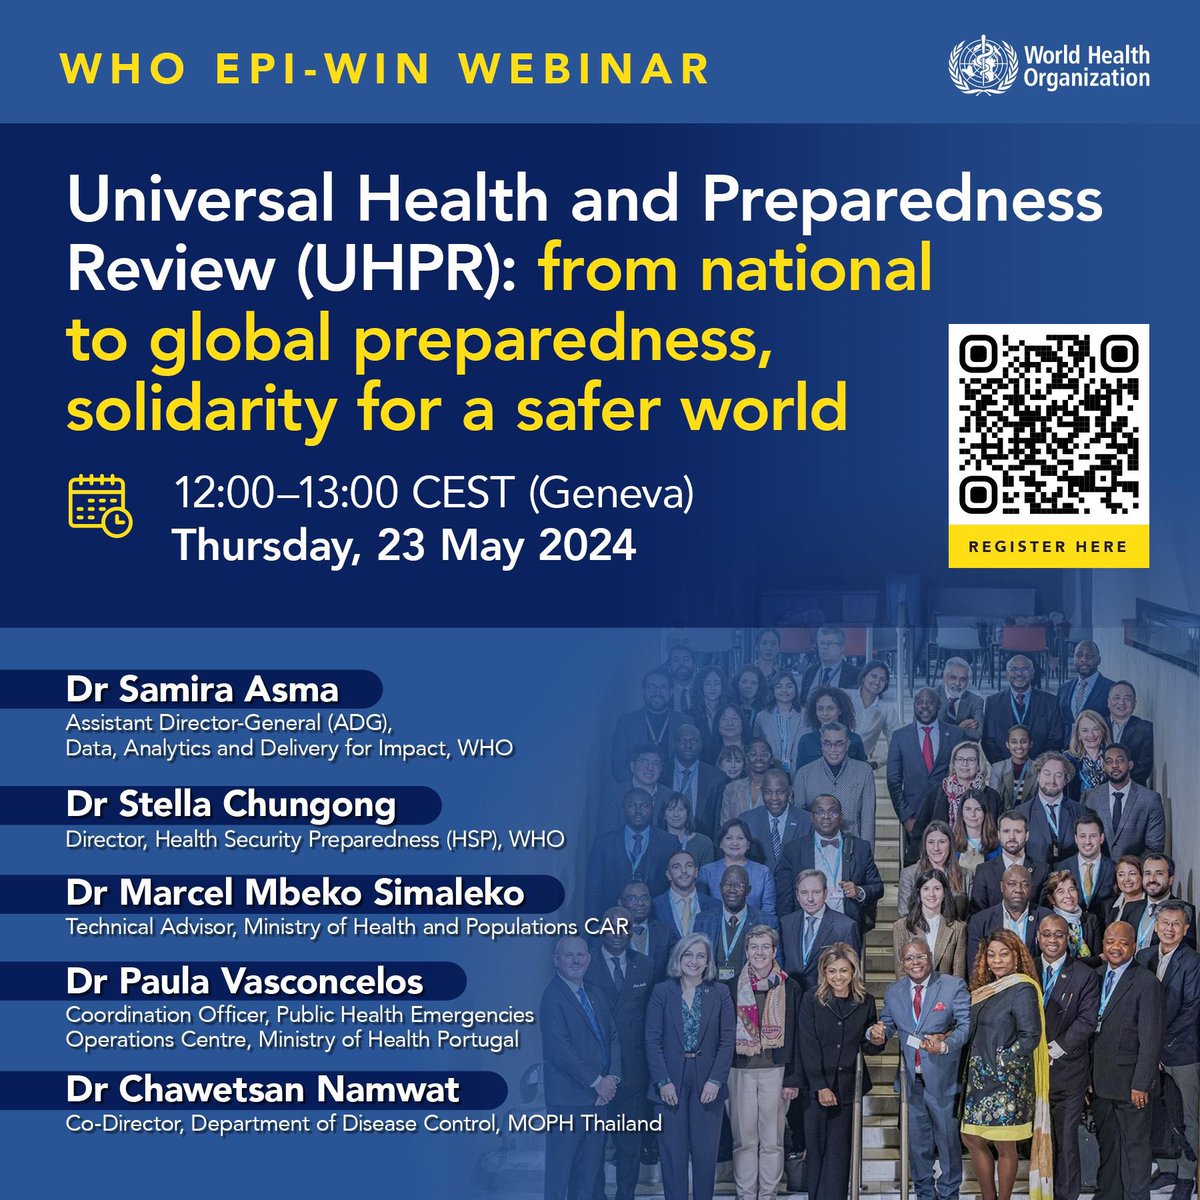 Managing emergencies &/or epidemics go beyond ministries of health! It takes work across sectors + leadership from the highest levels. So what did #Portugal #CAR #Thailand do + what role can #UHPR play? Join @WHO public webinar 23 May 2024 1200-1300 CET: lnkd.in/egumgs8A